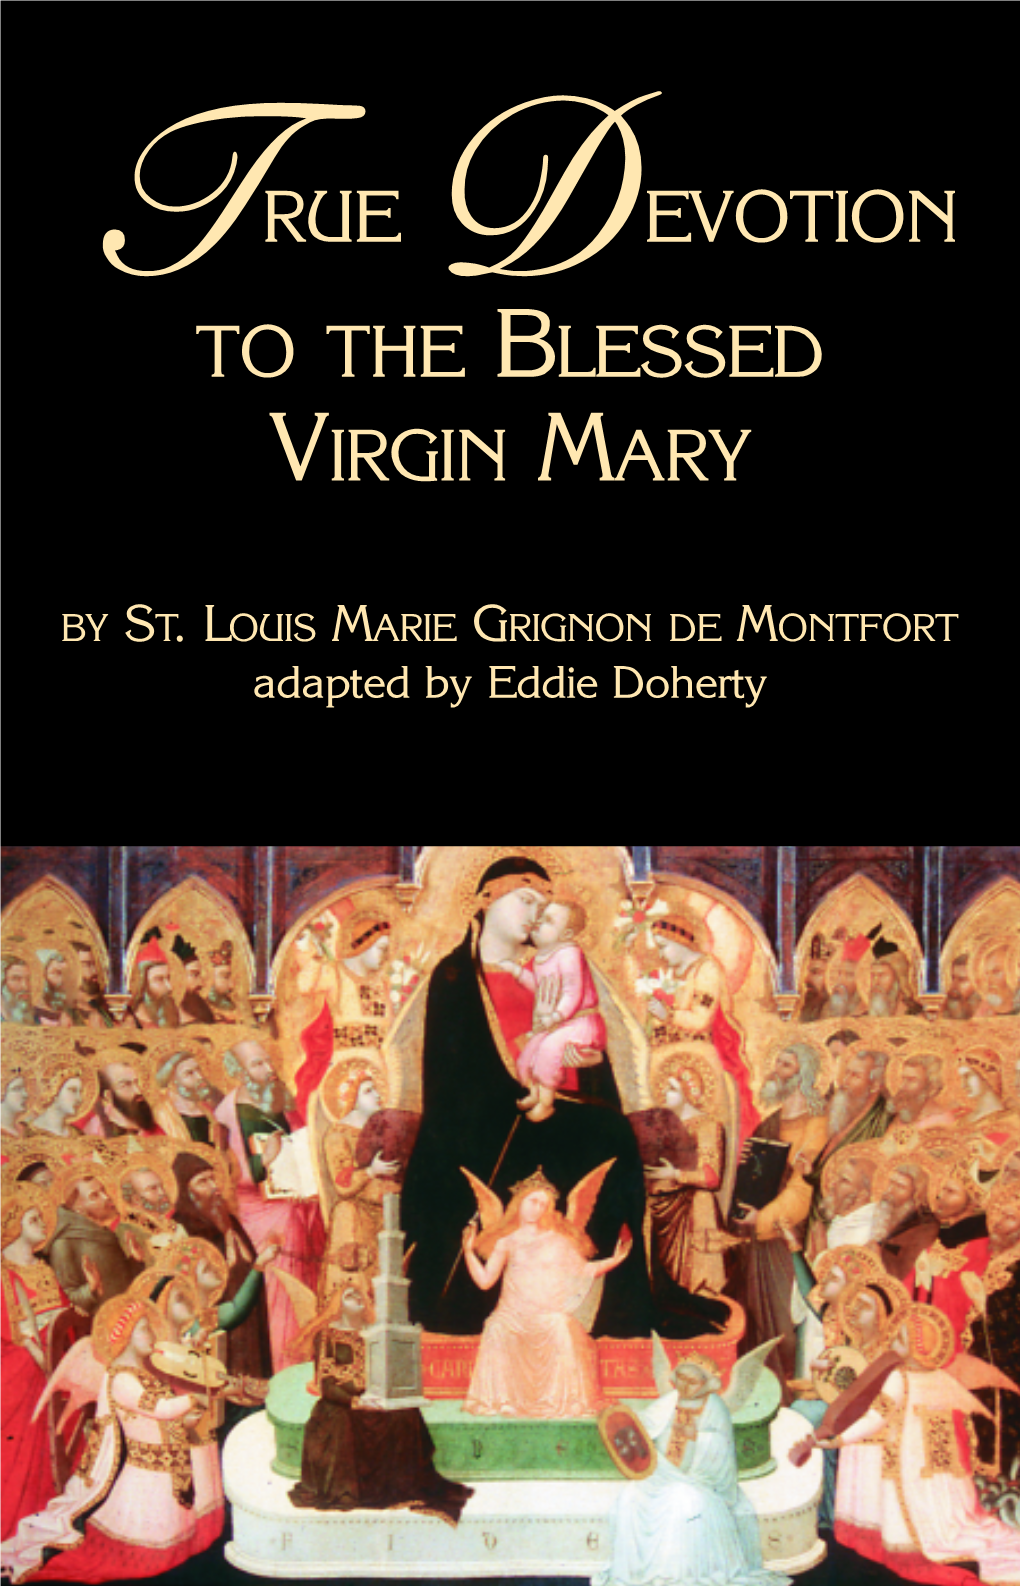 305-26 Truedevotion to the Blessed Virgin Mary